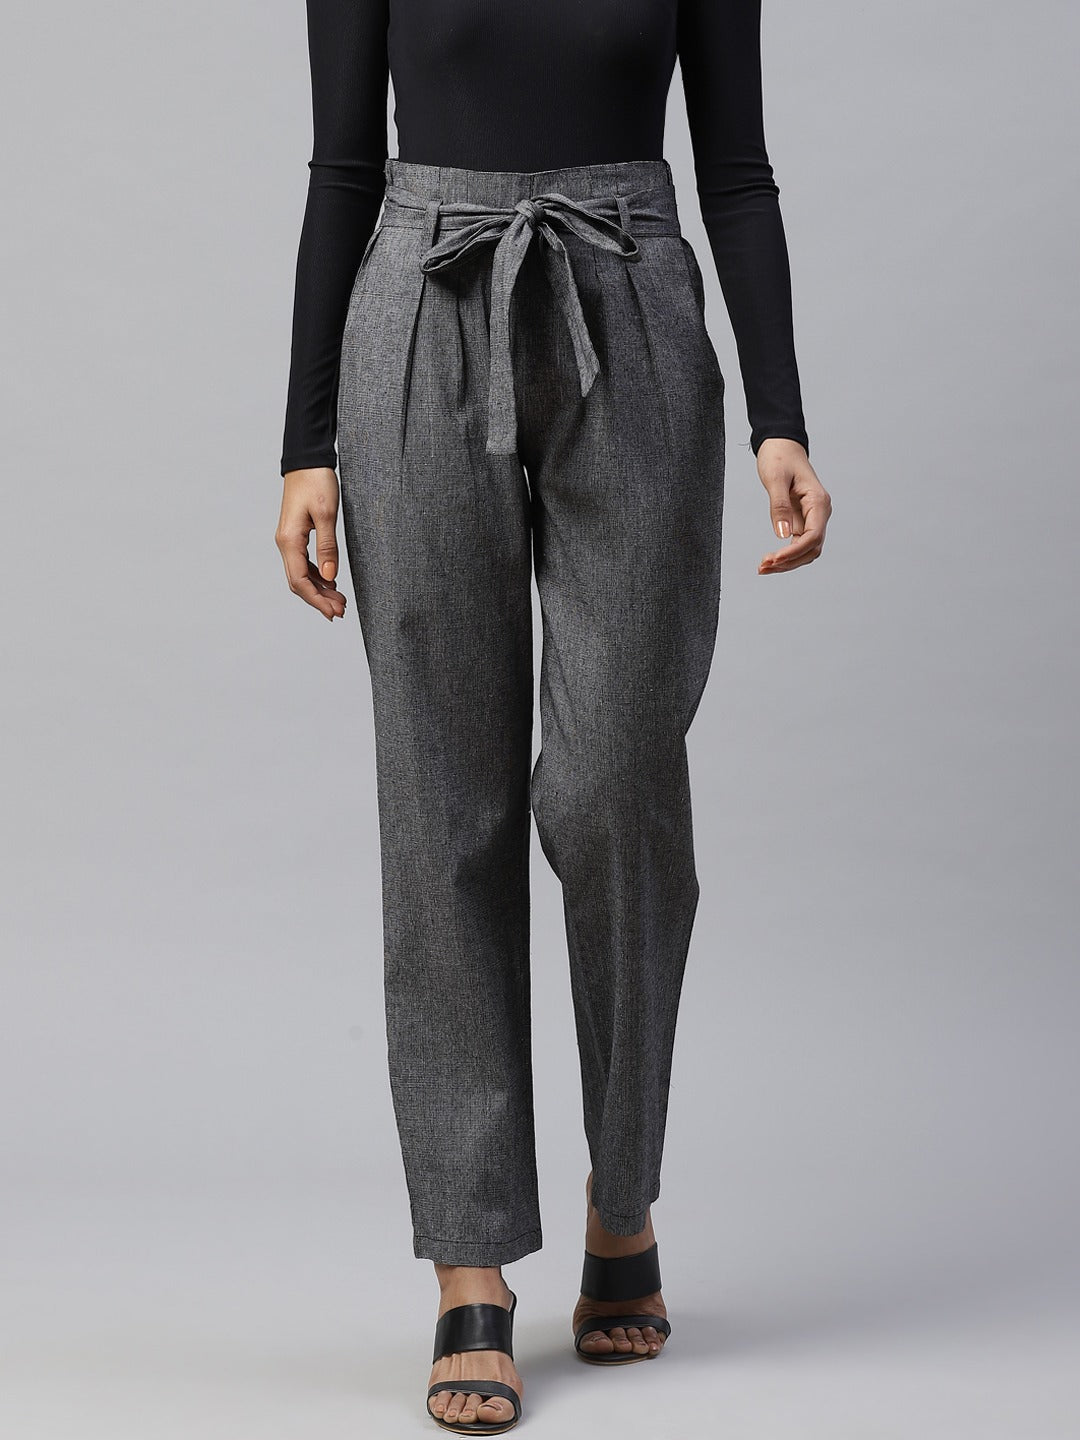 Cigarette Pants in Charcoal Grey | Retro Inspired Pants – Vixen by  Micheline Pitt